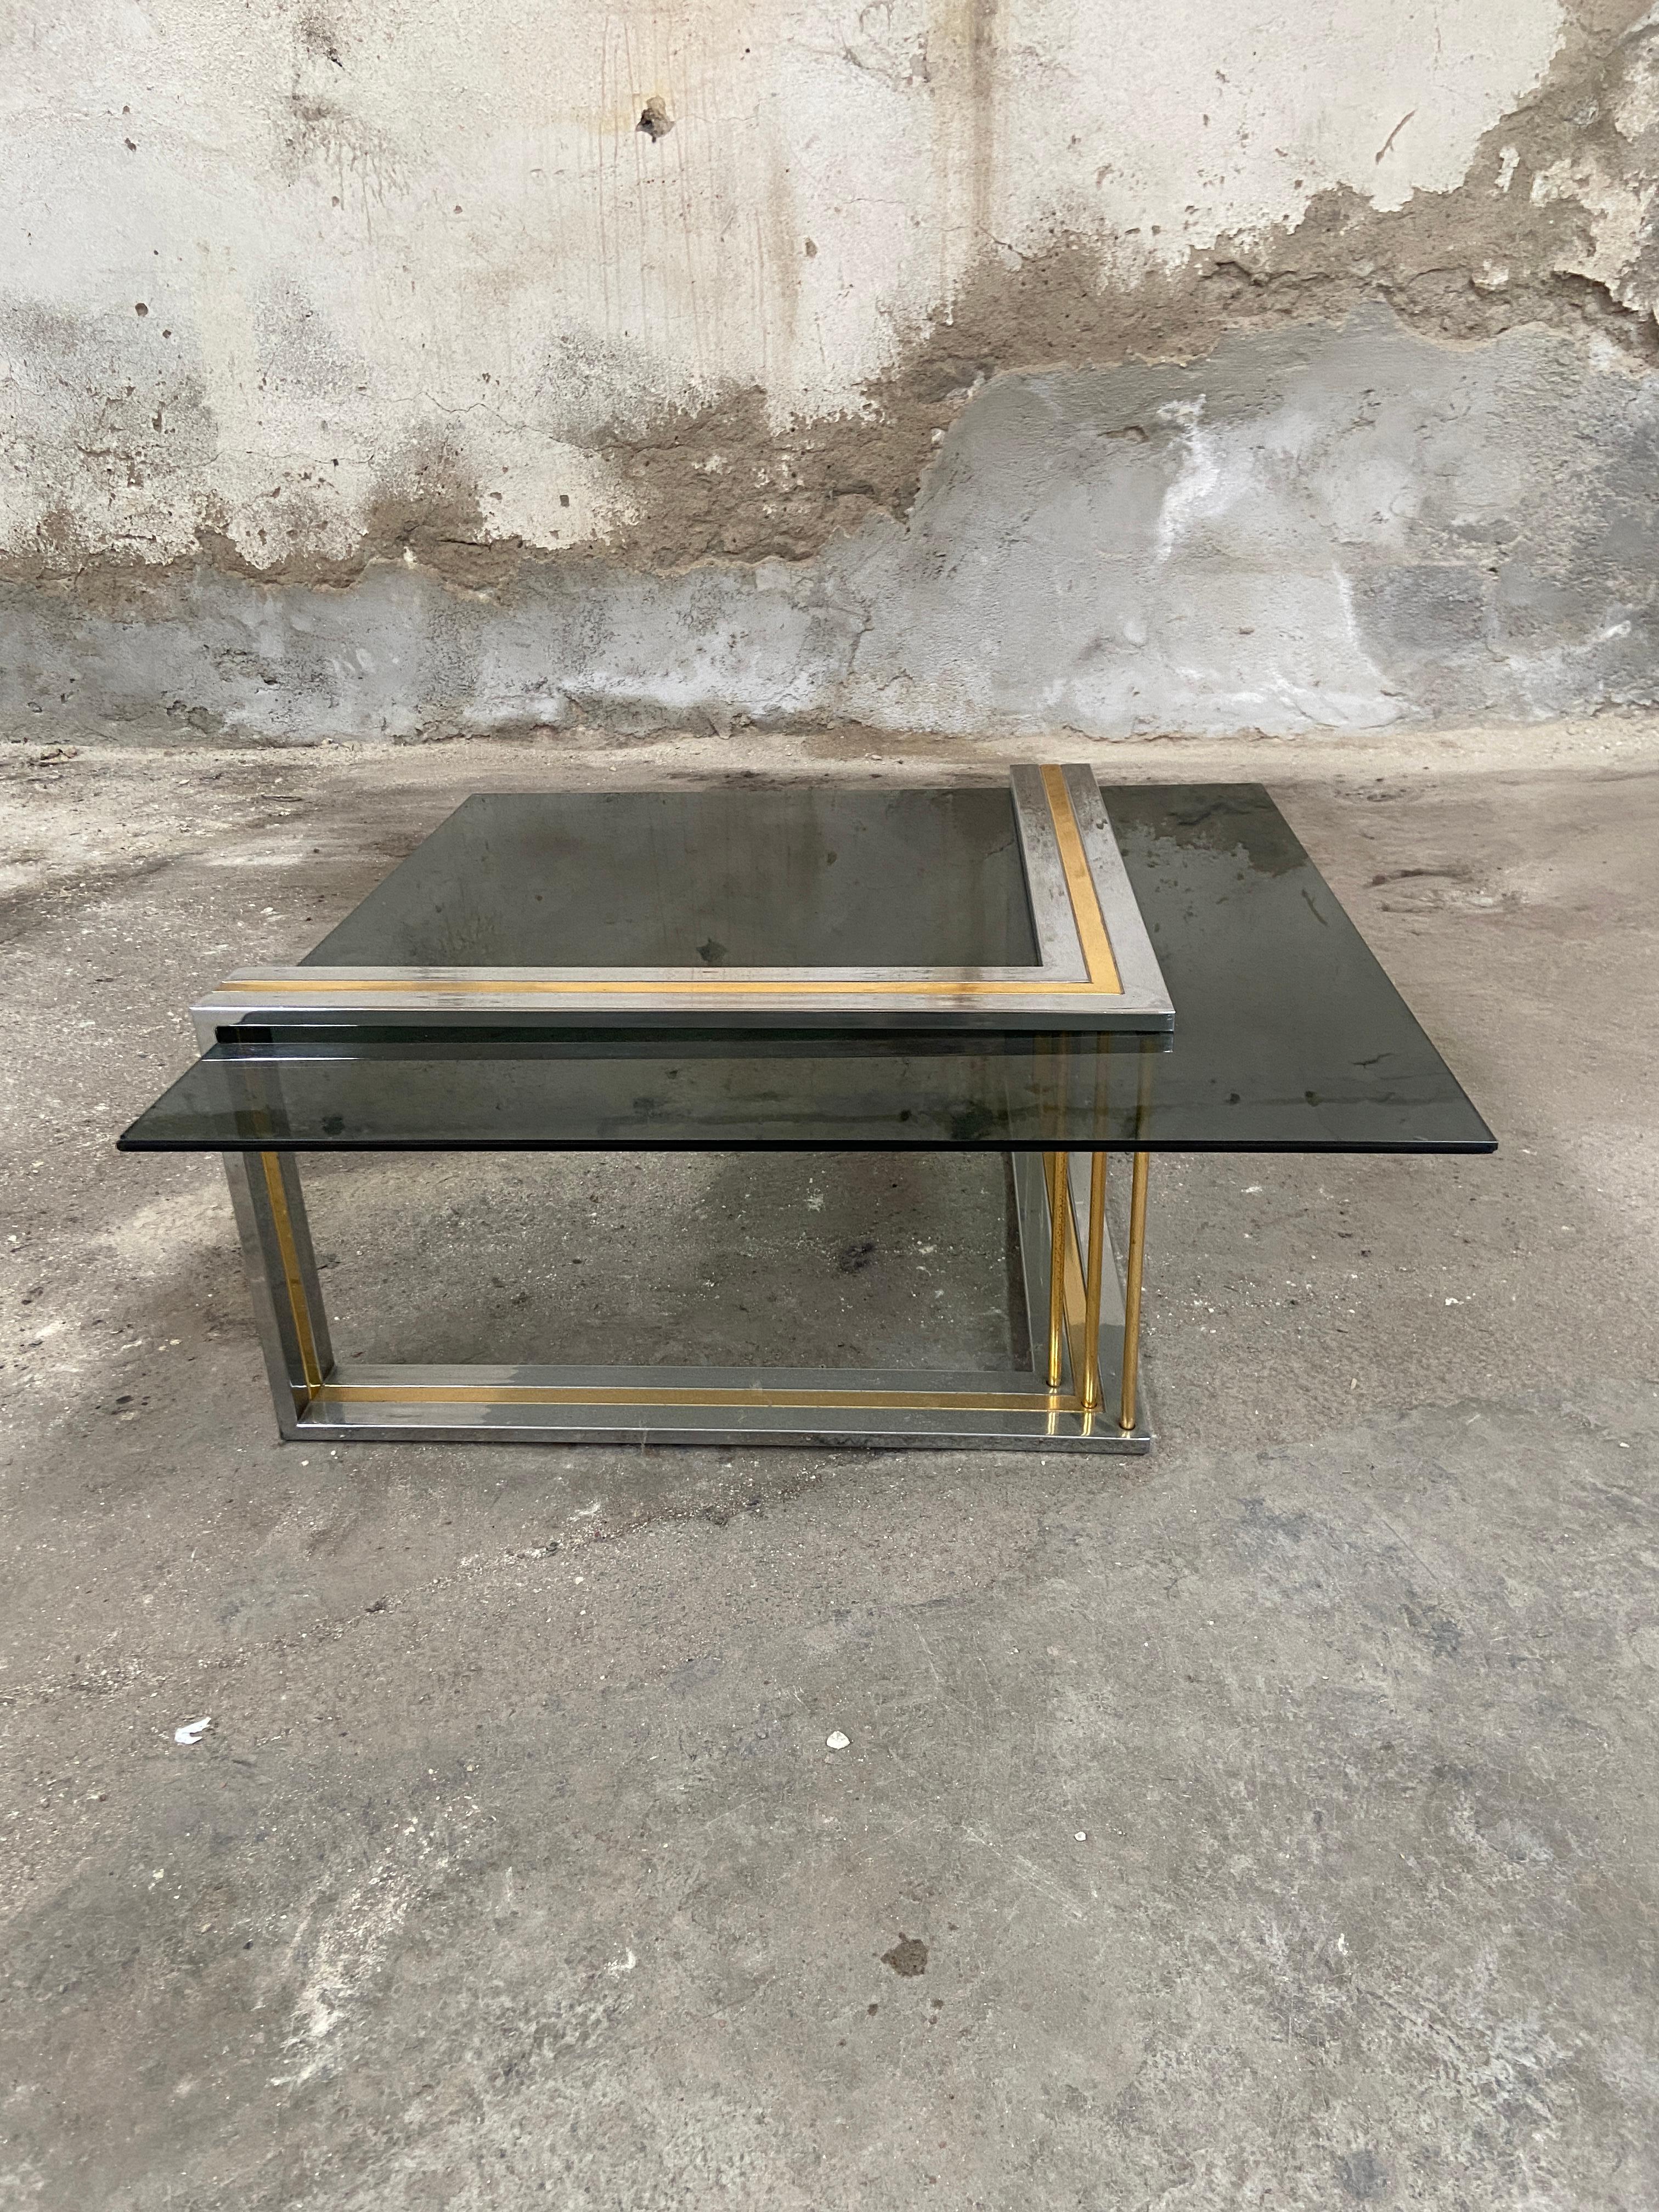 Mid-Century Modern Italian Coffe or Sofa Table by Romeo Rega. The table has a Chrome and Brass structure and a smoked glass top.
A couple of the edges of the glass have little chips underneath, but in the complex the table is in really good vintage